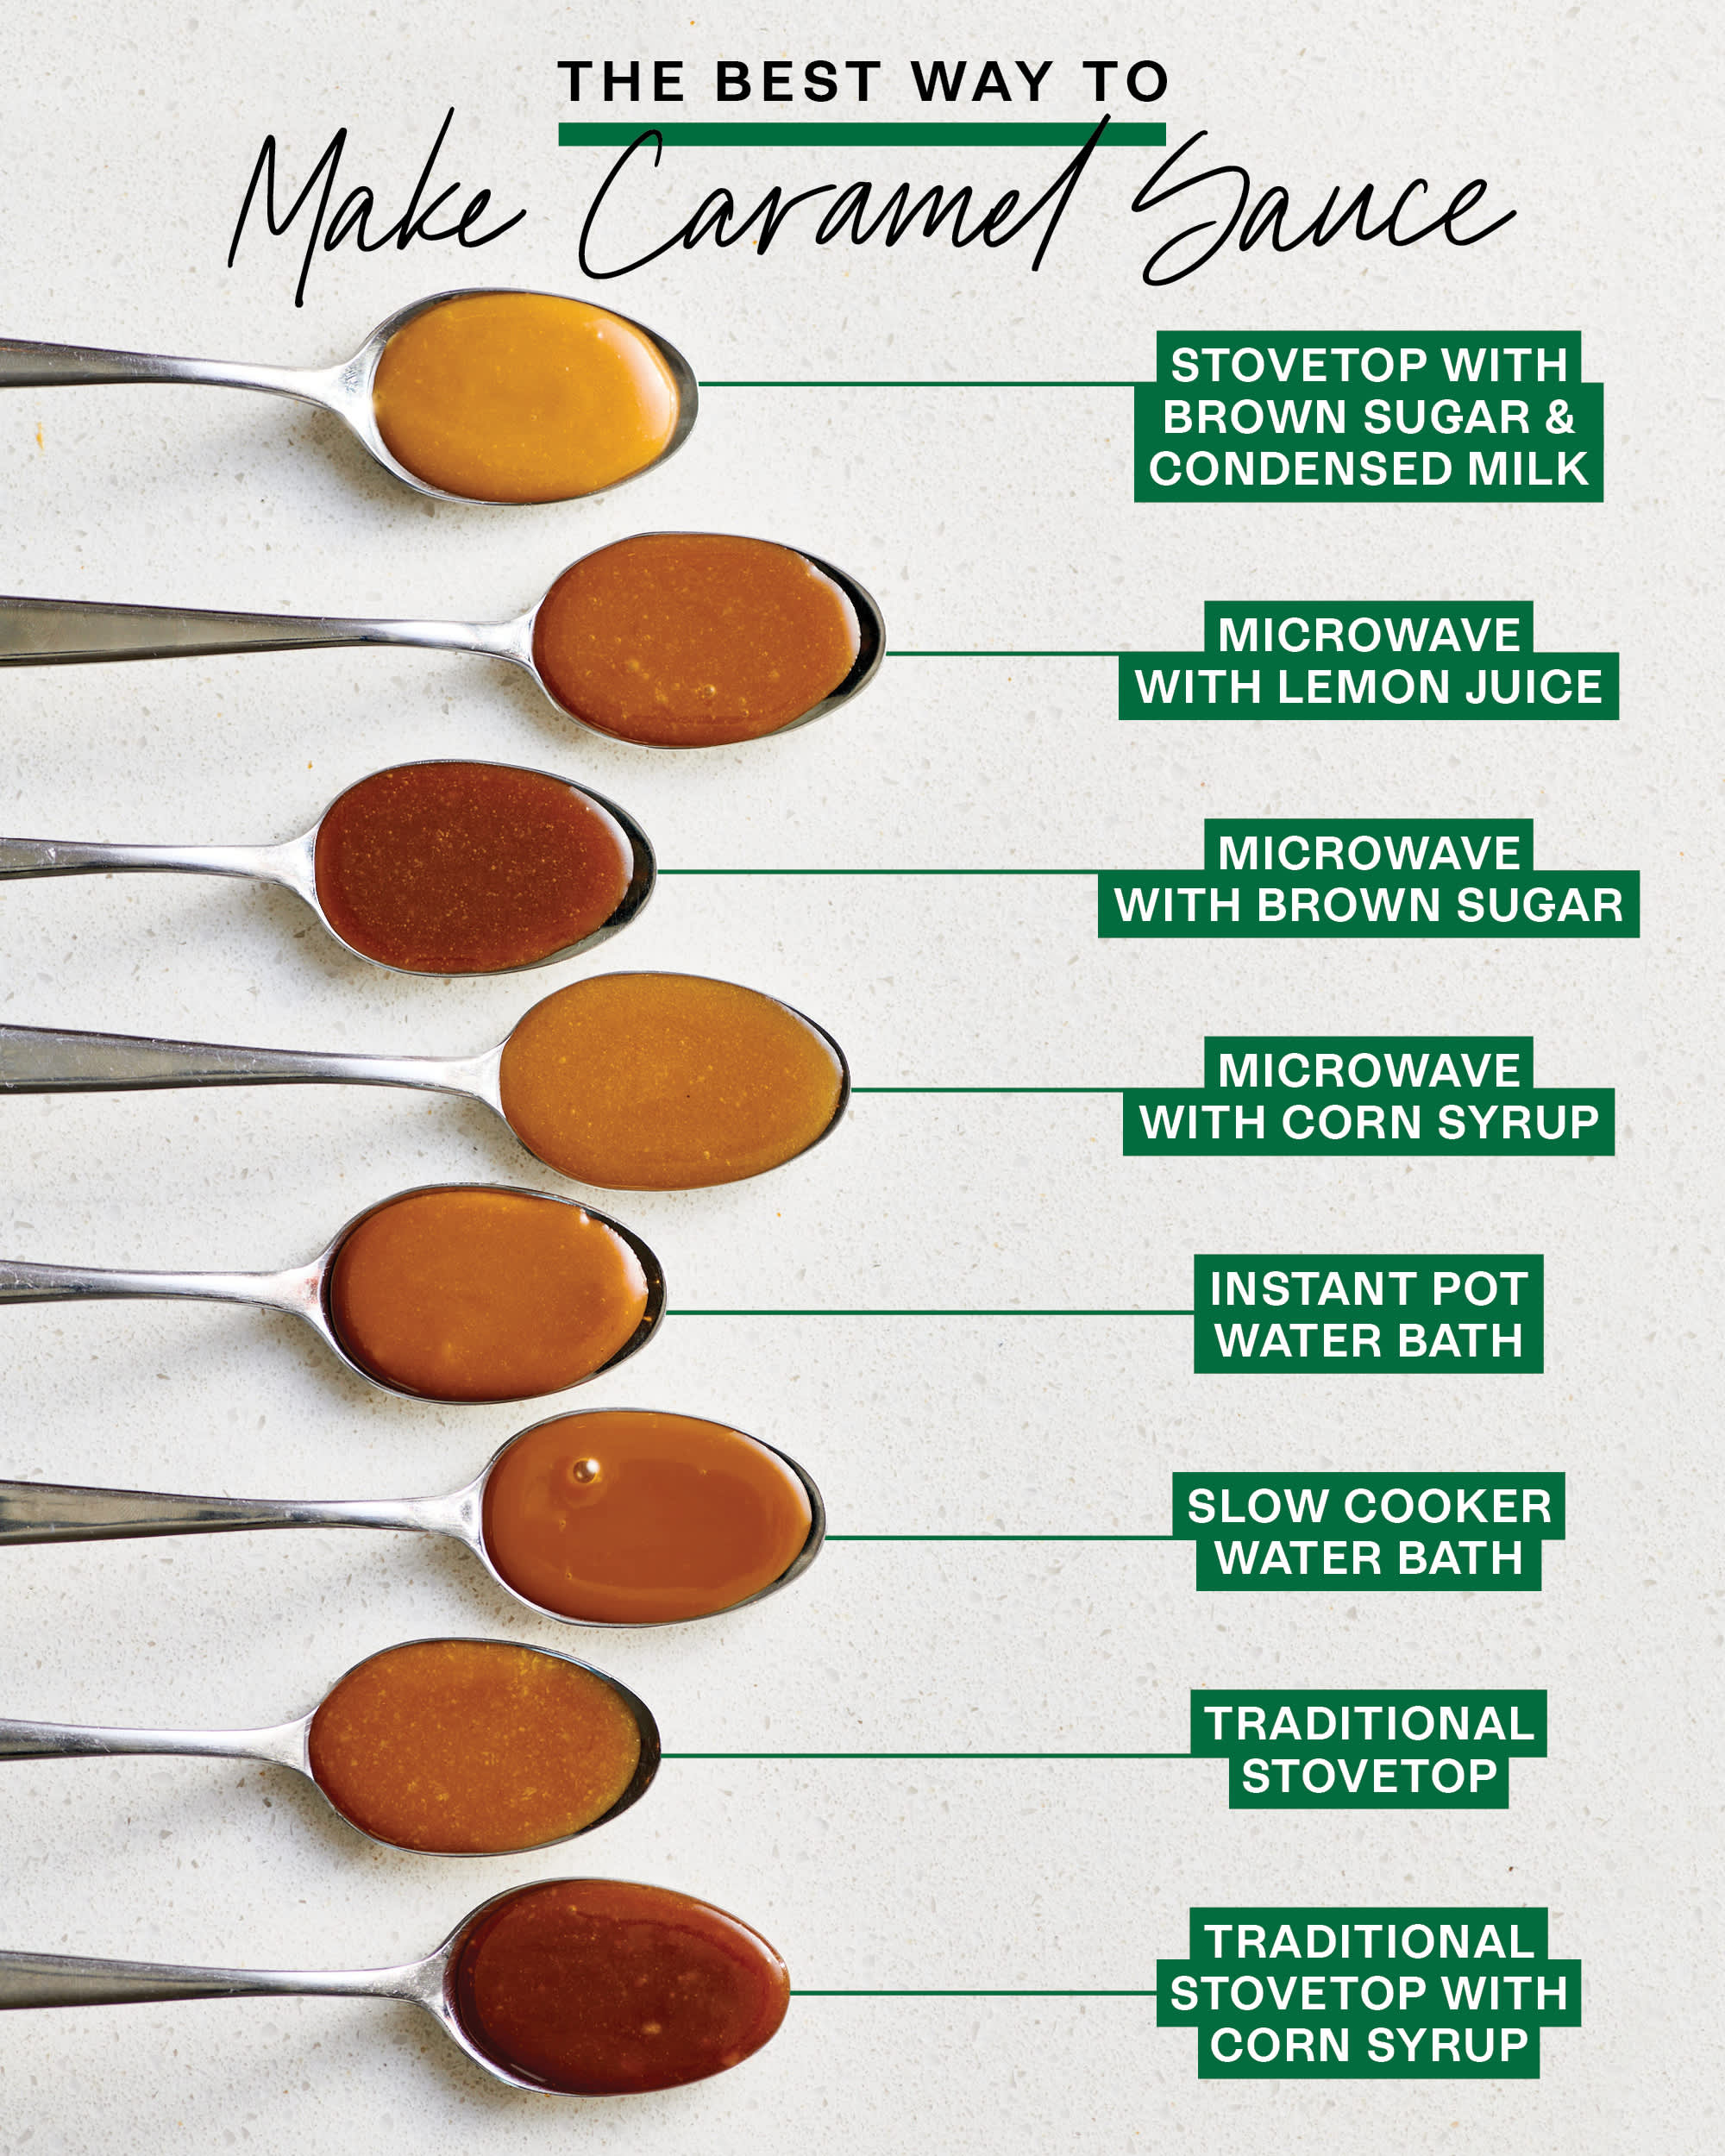 How to Make Caramel Sauce (The Best Method)